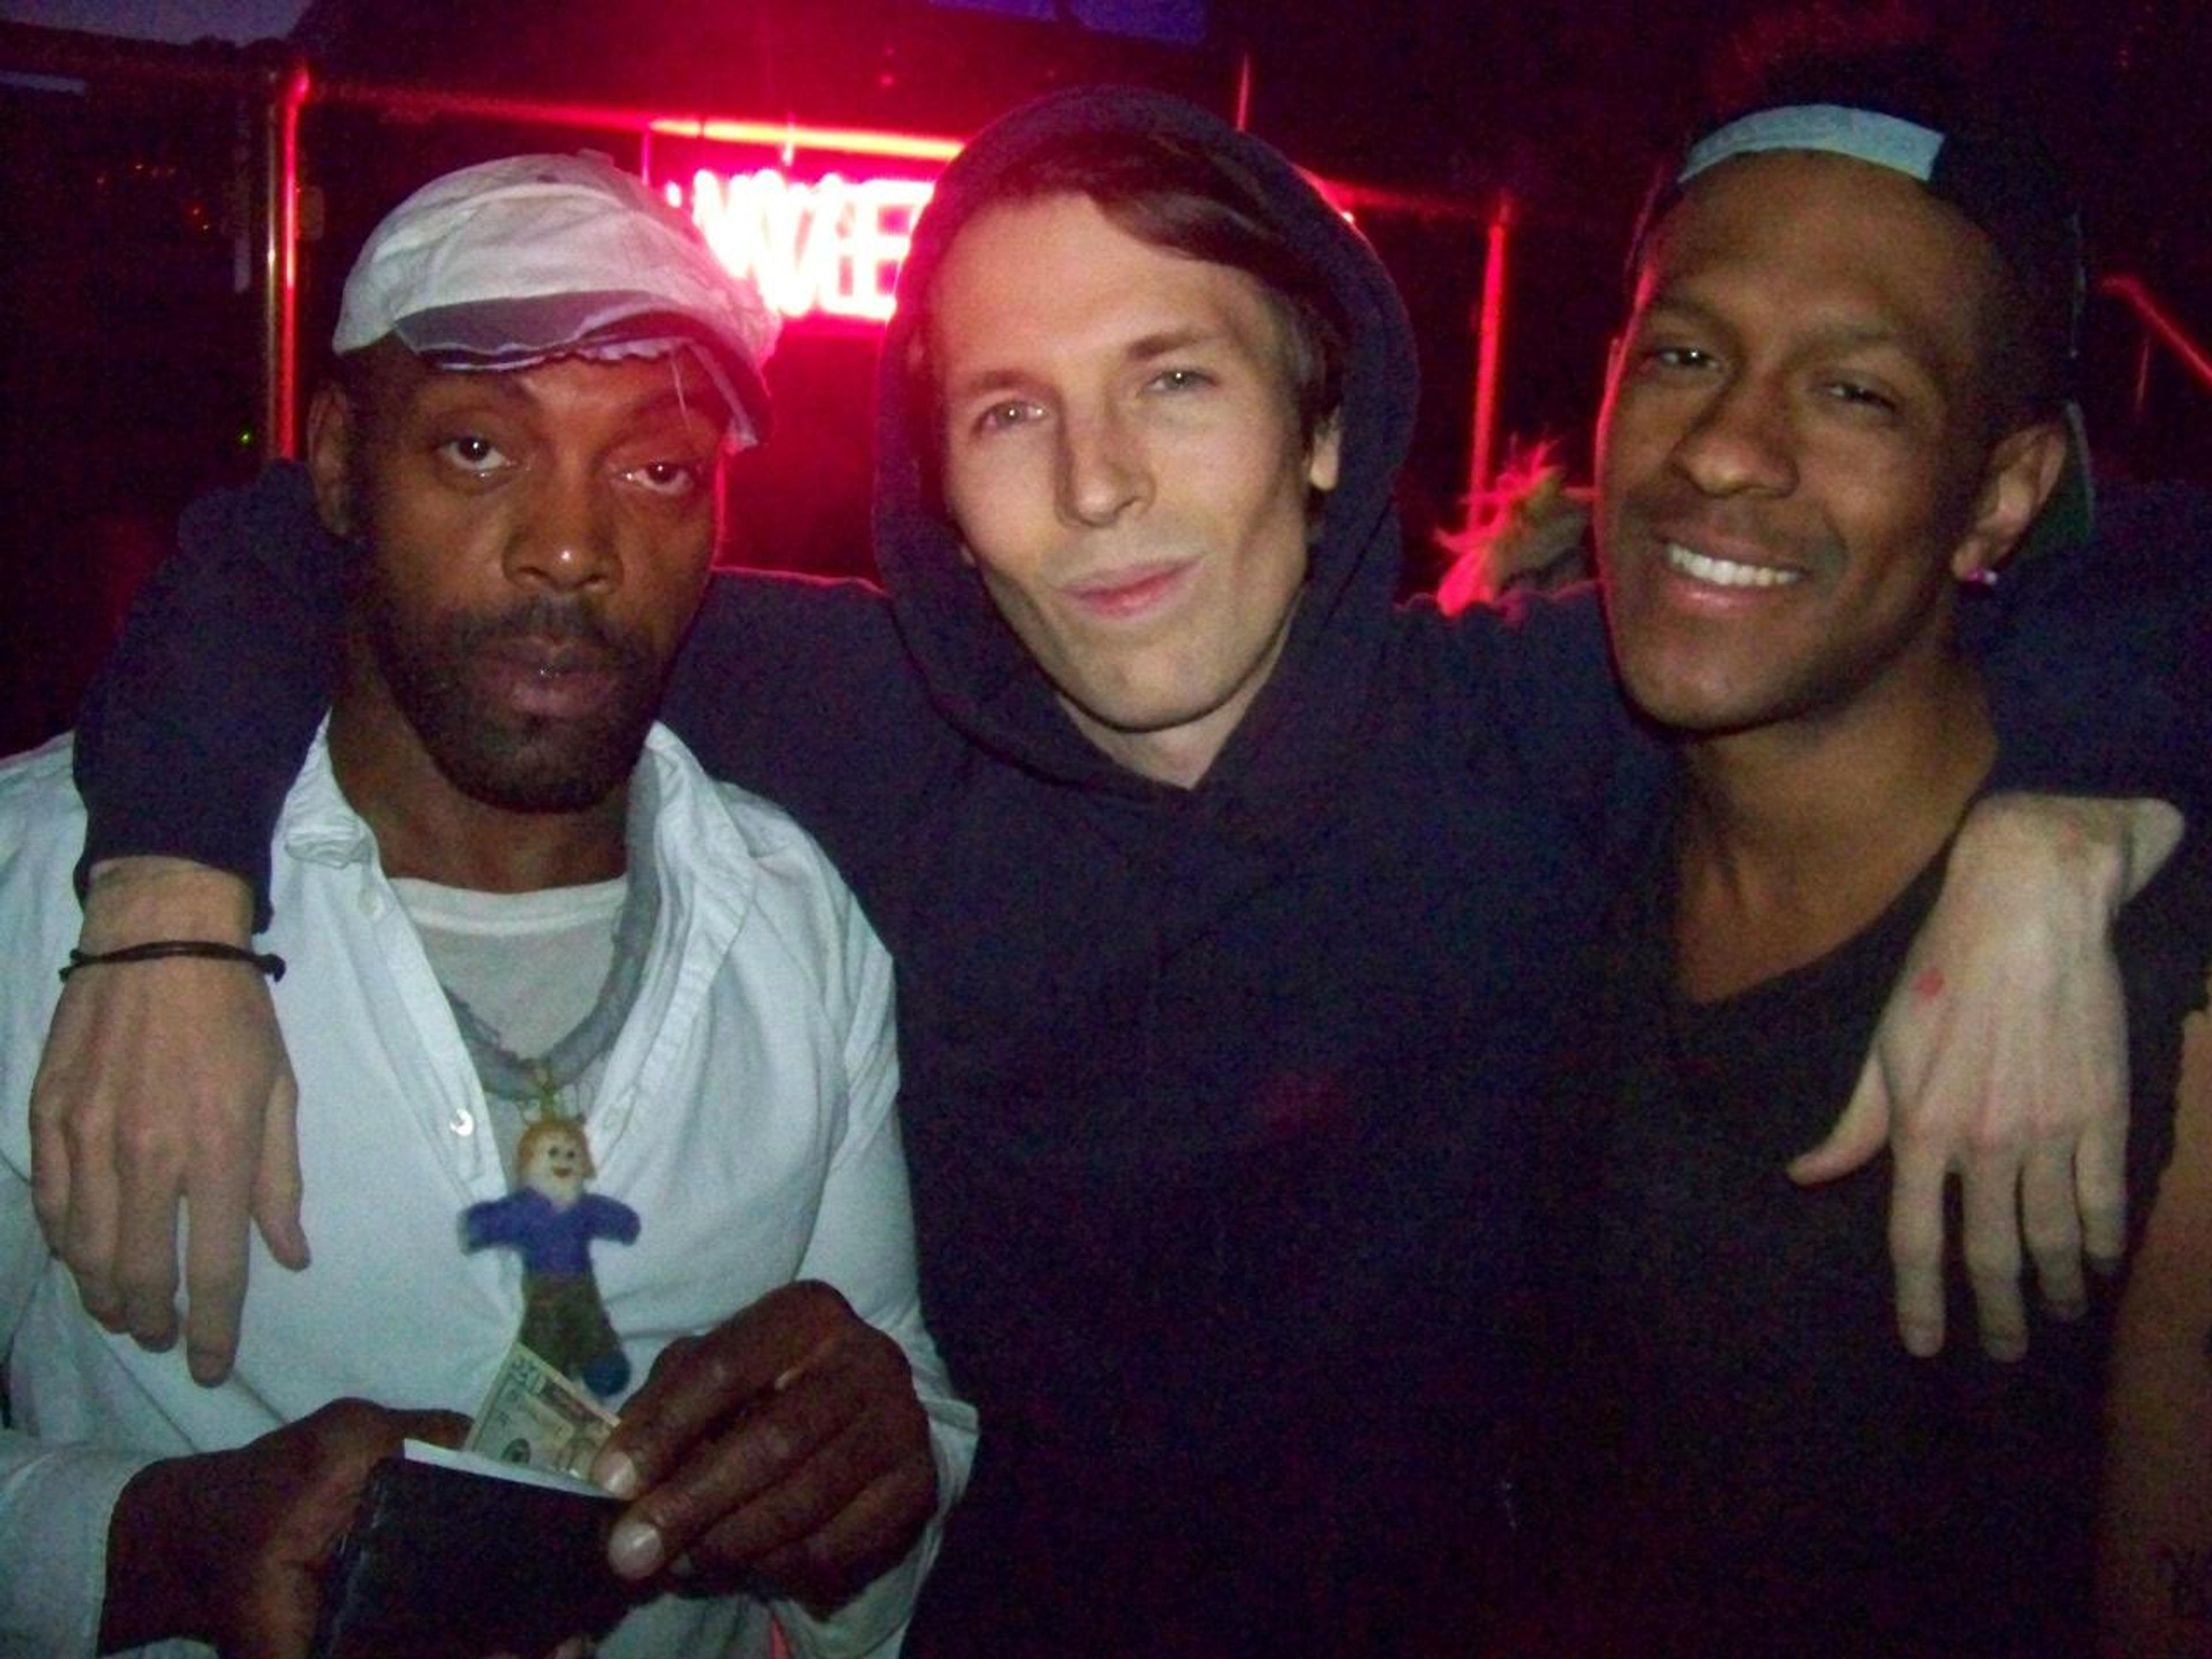 Andre Walker, Ryan McGinley and Mykki Blanco, photo &copy; Quentin Belt